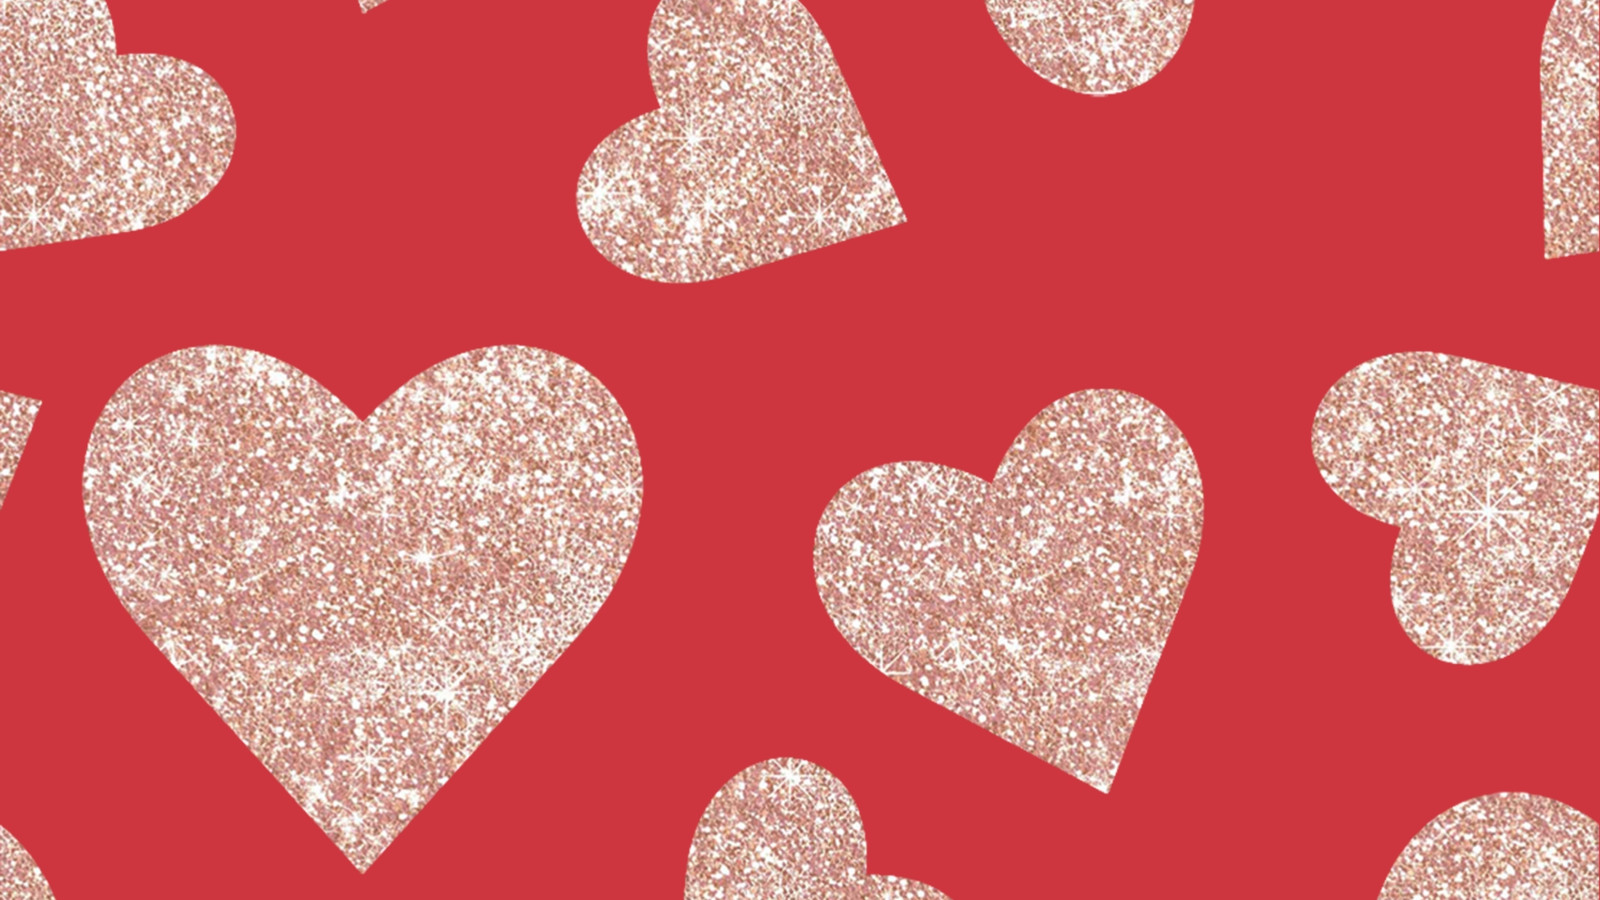 Free Valentine's Day Zoom virtual background templates | Canva